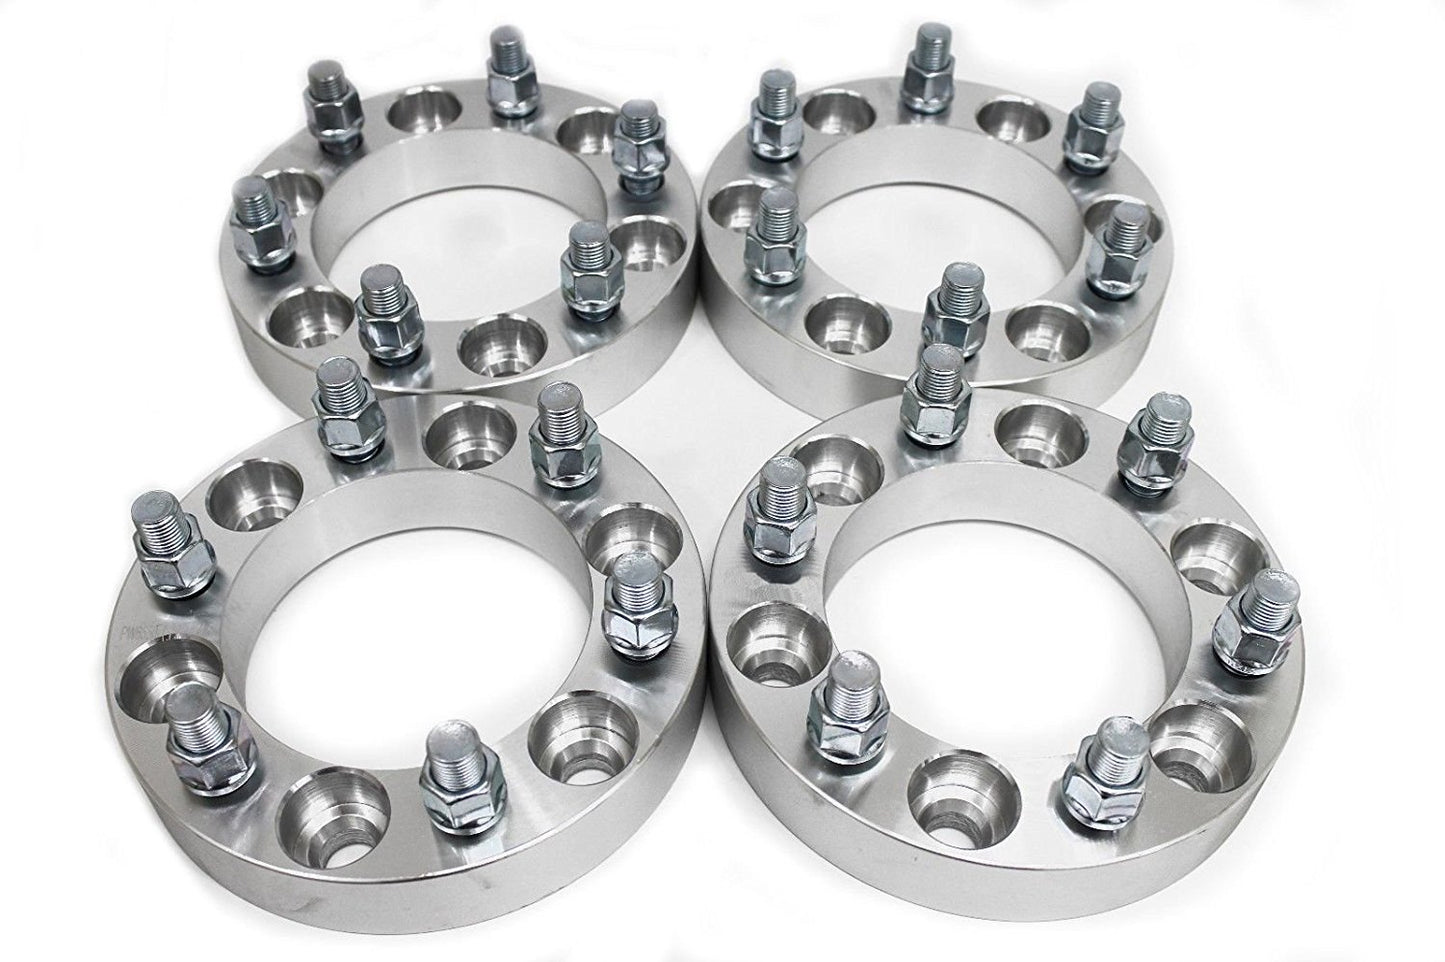 4 pcs 2" (50mm) 6 x5.5 to 6 x 5.5 Wheel Spacers Adapters|14x1.5 Studs for Cadillac Chevrolet GMC